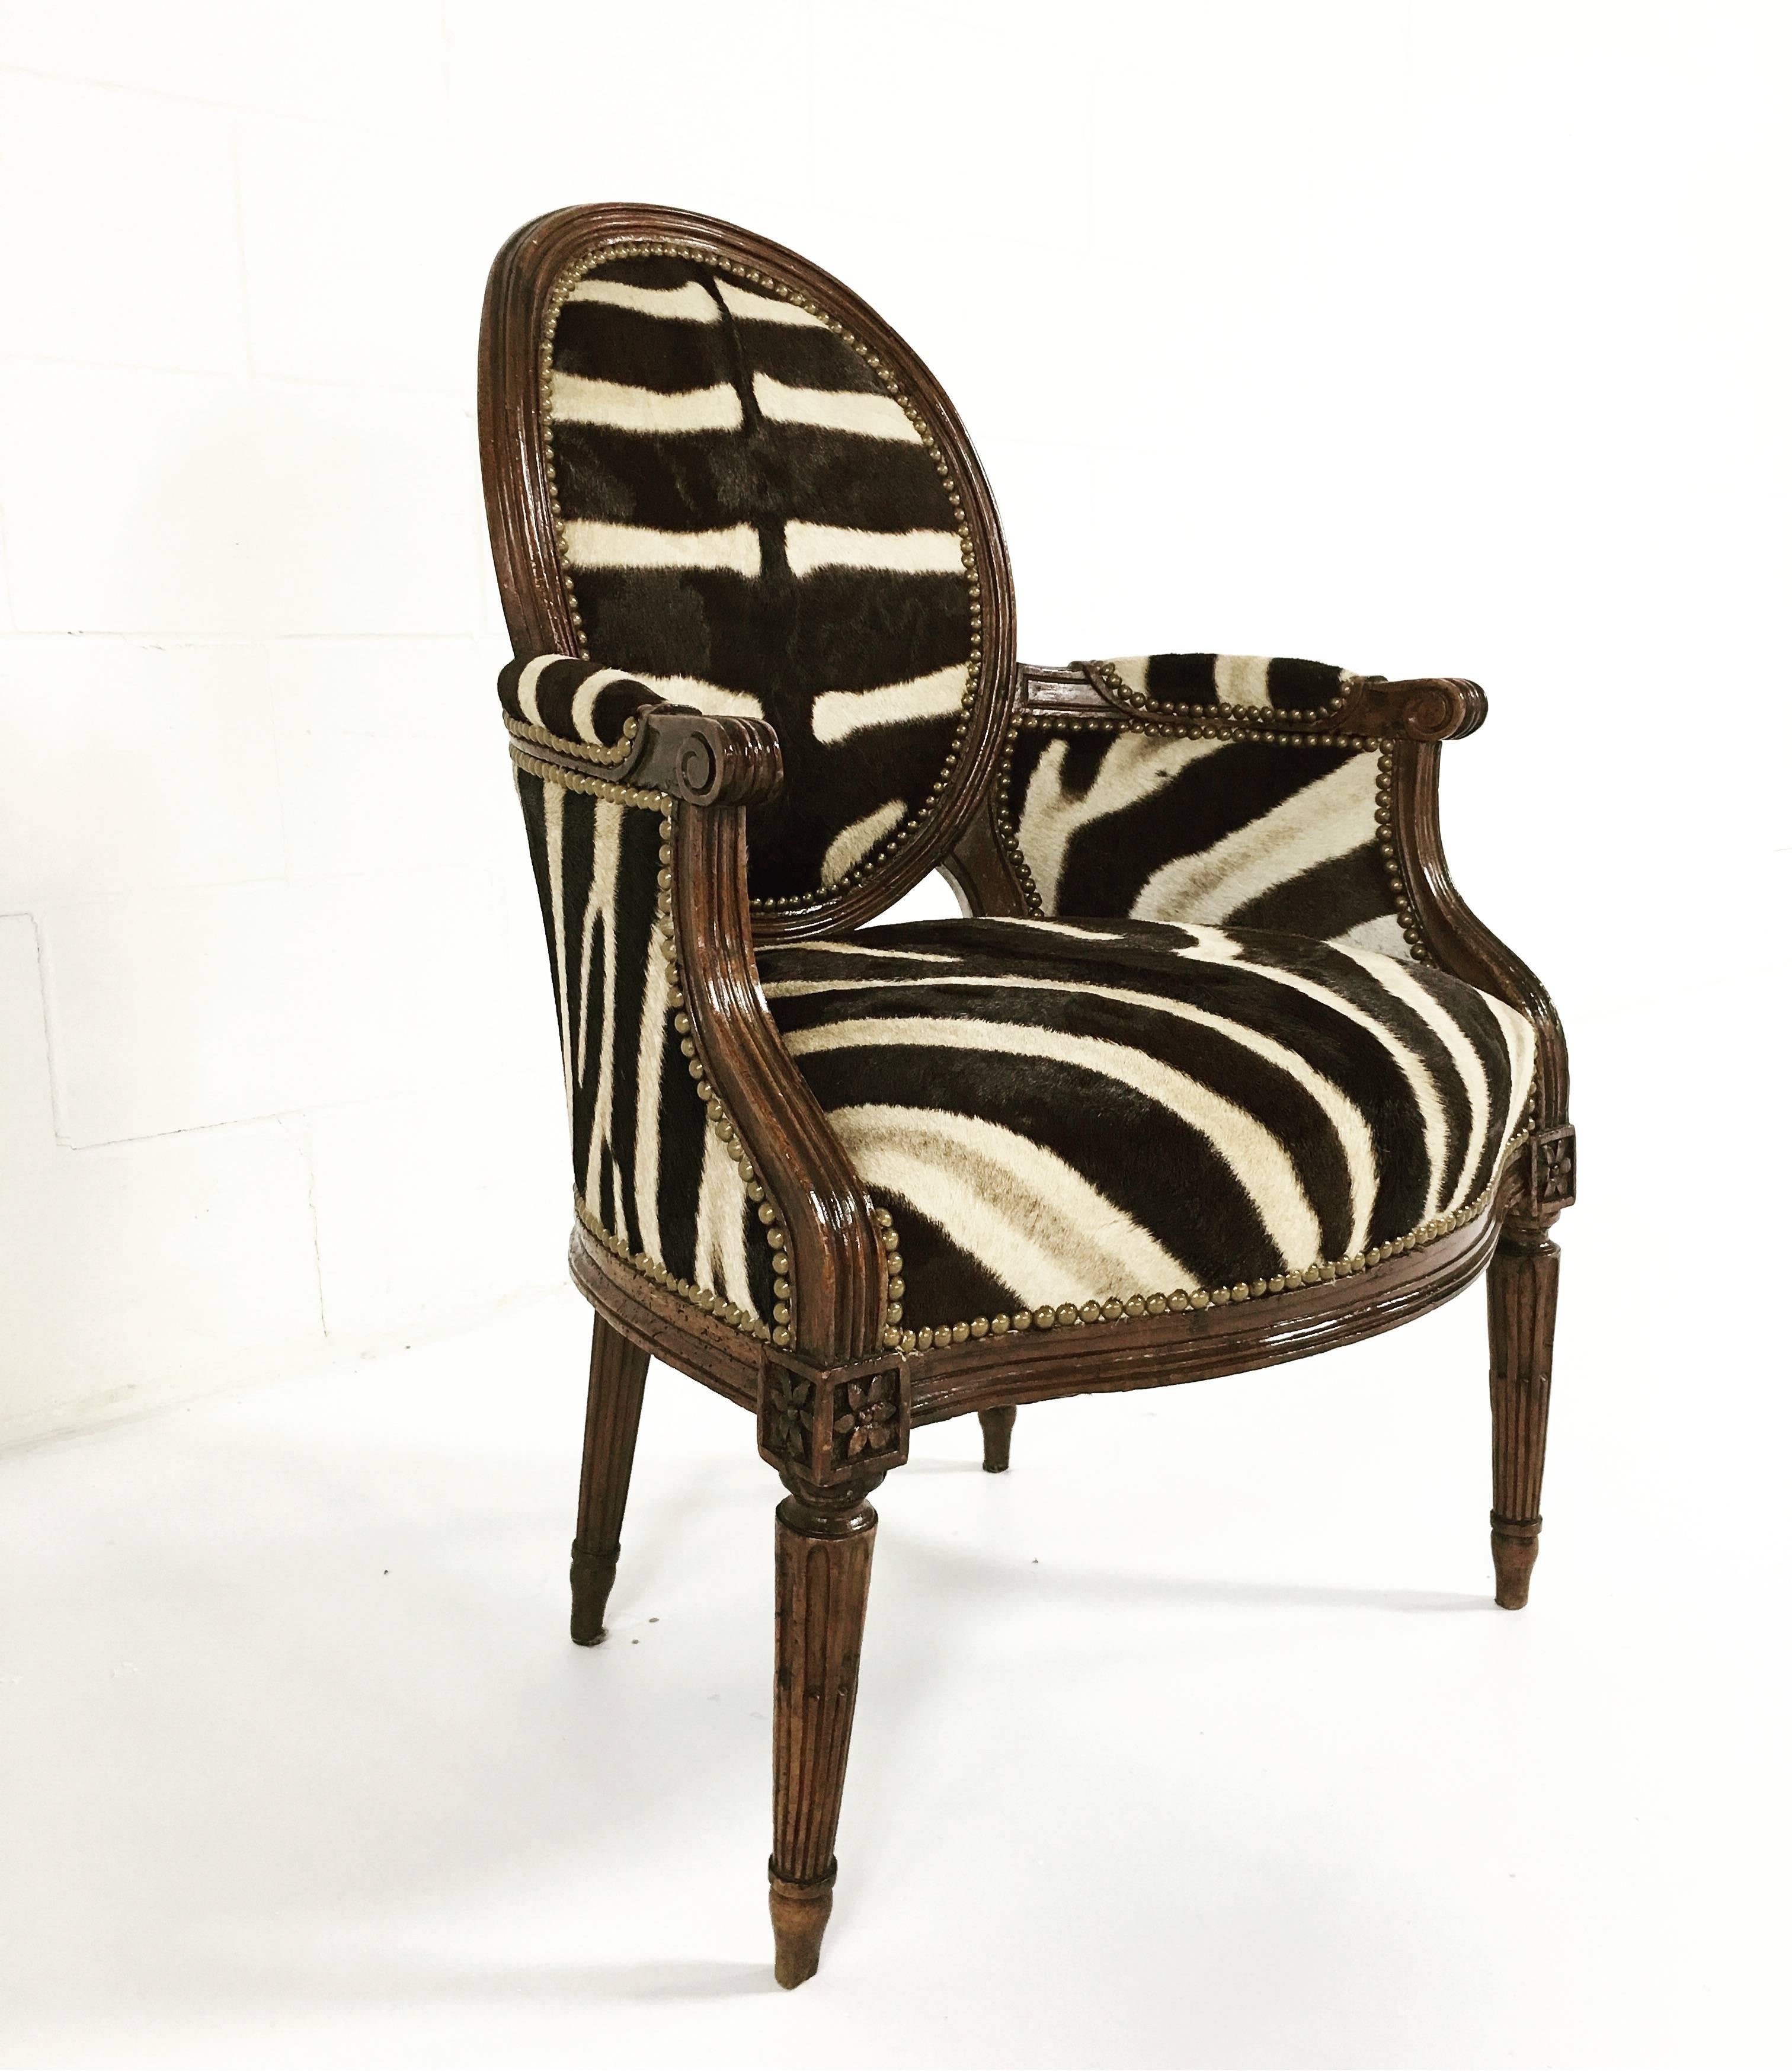 A simple yet elegant Louis XVI style bergère in stunning walnut. Newly upholstered in zebra hide by Forsyth master upholsterers, this chair is the perfect accent for any room.

 

Width - 25 inches depth, 20 inches back height, 36 inches seat